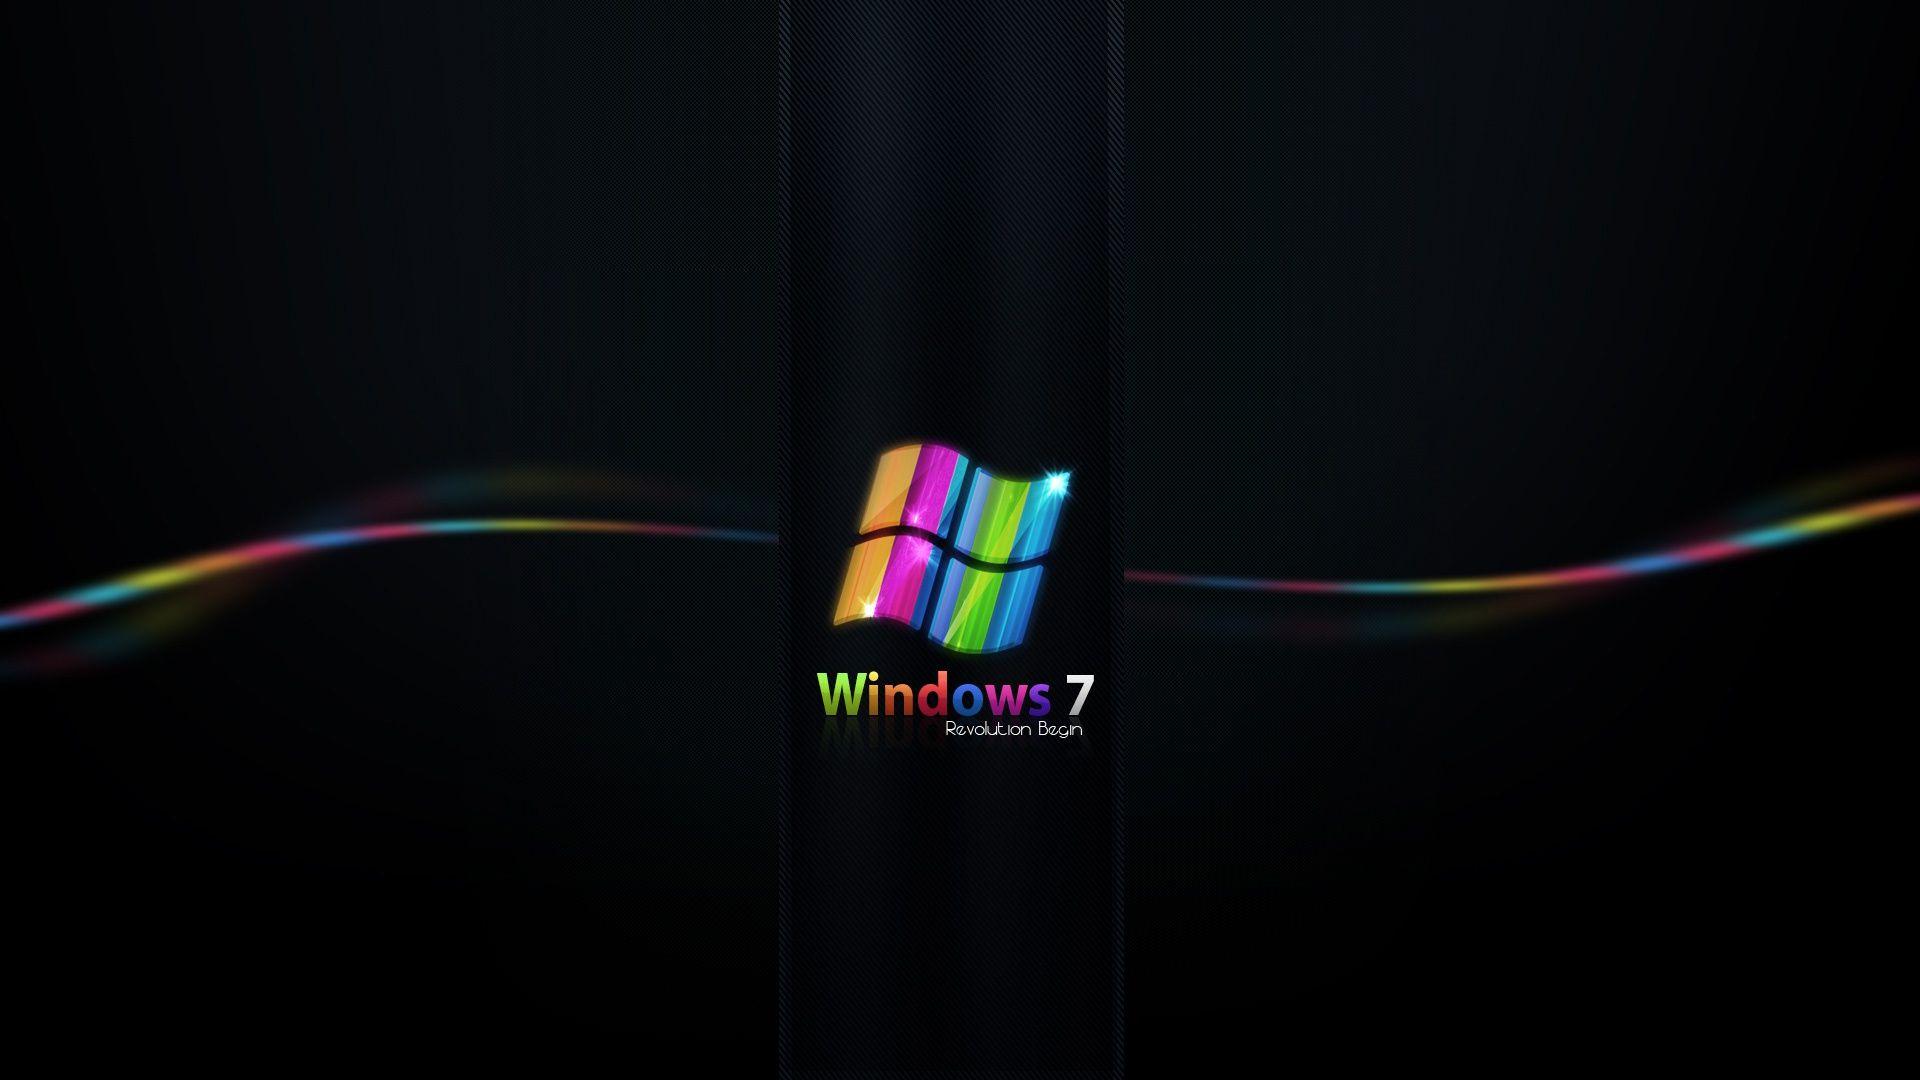 Rainbow Colored Windows 7 background in 1920x1080 resolution. HD